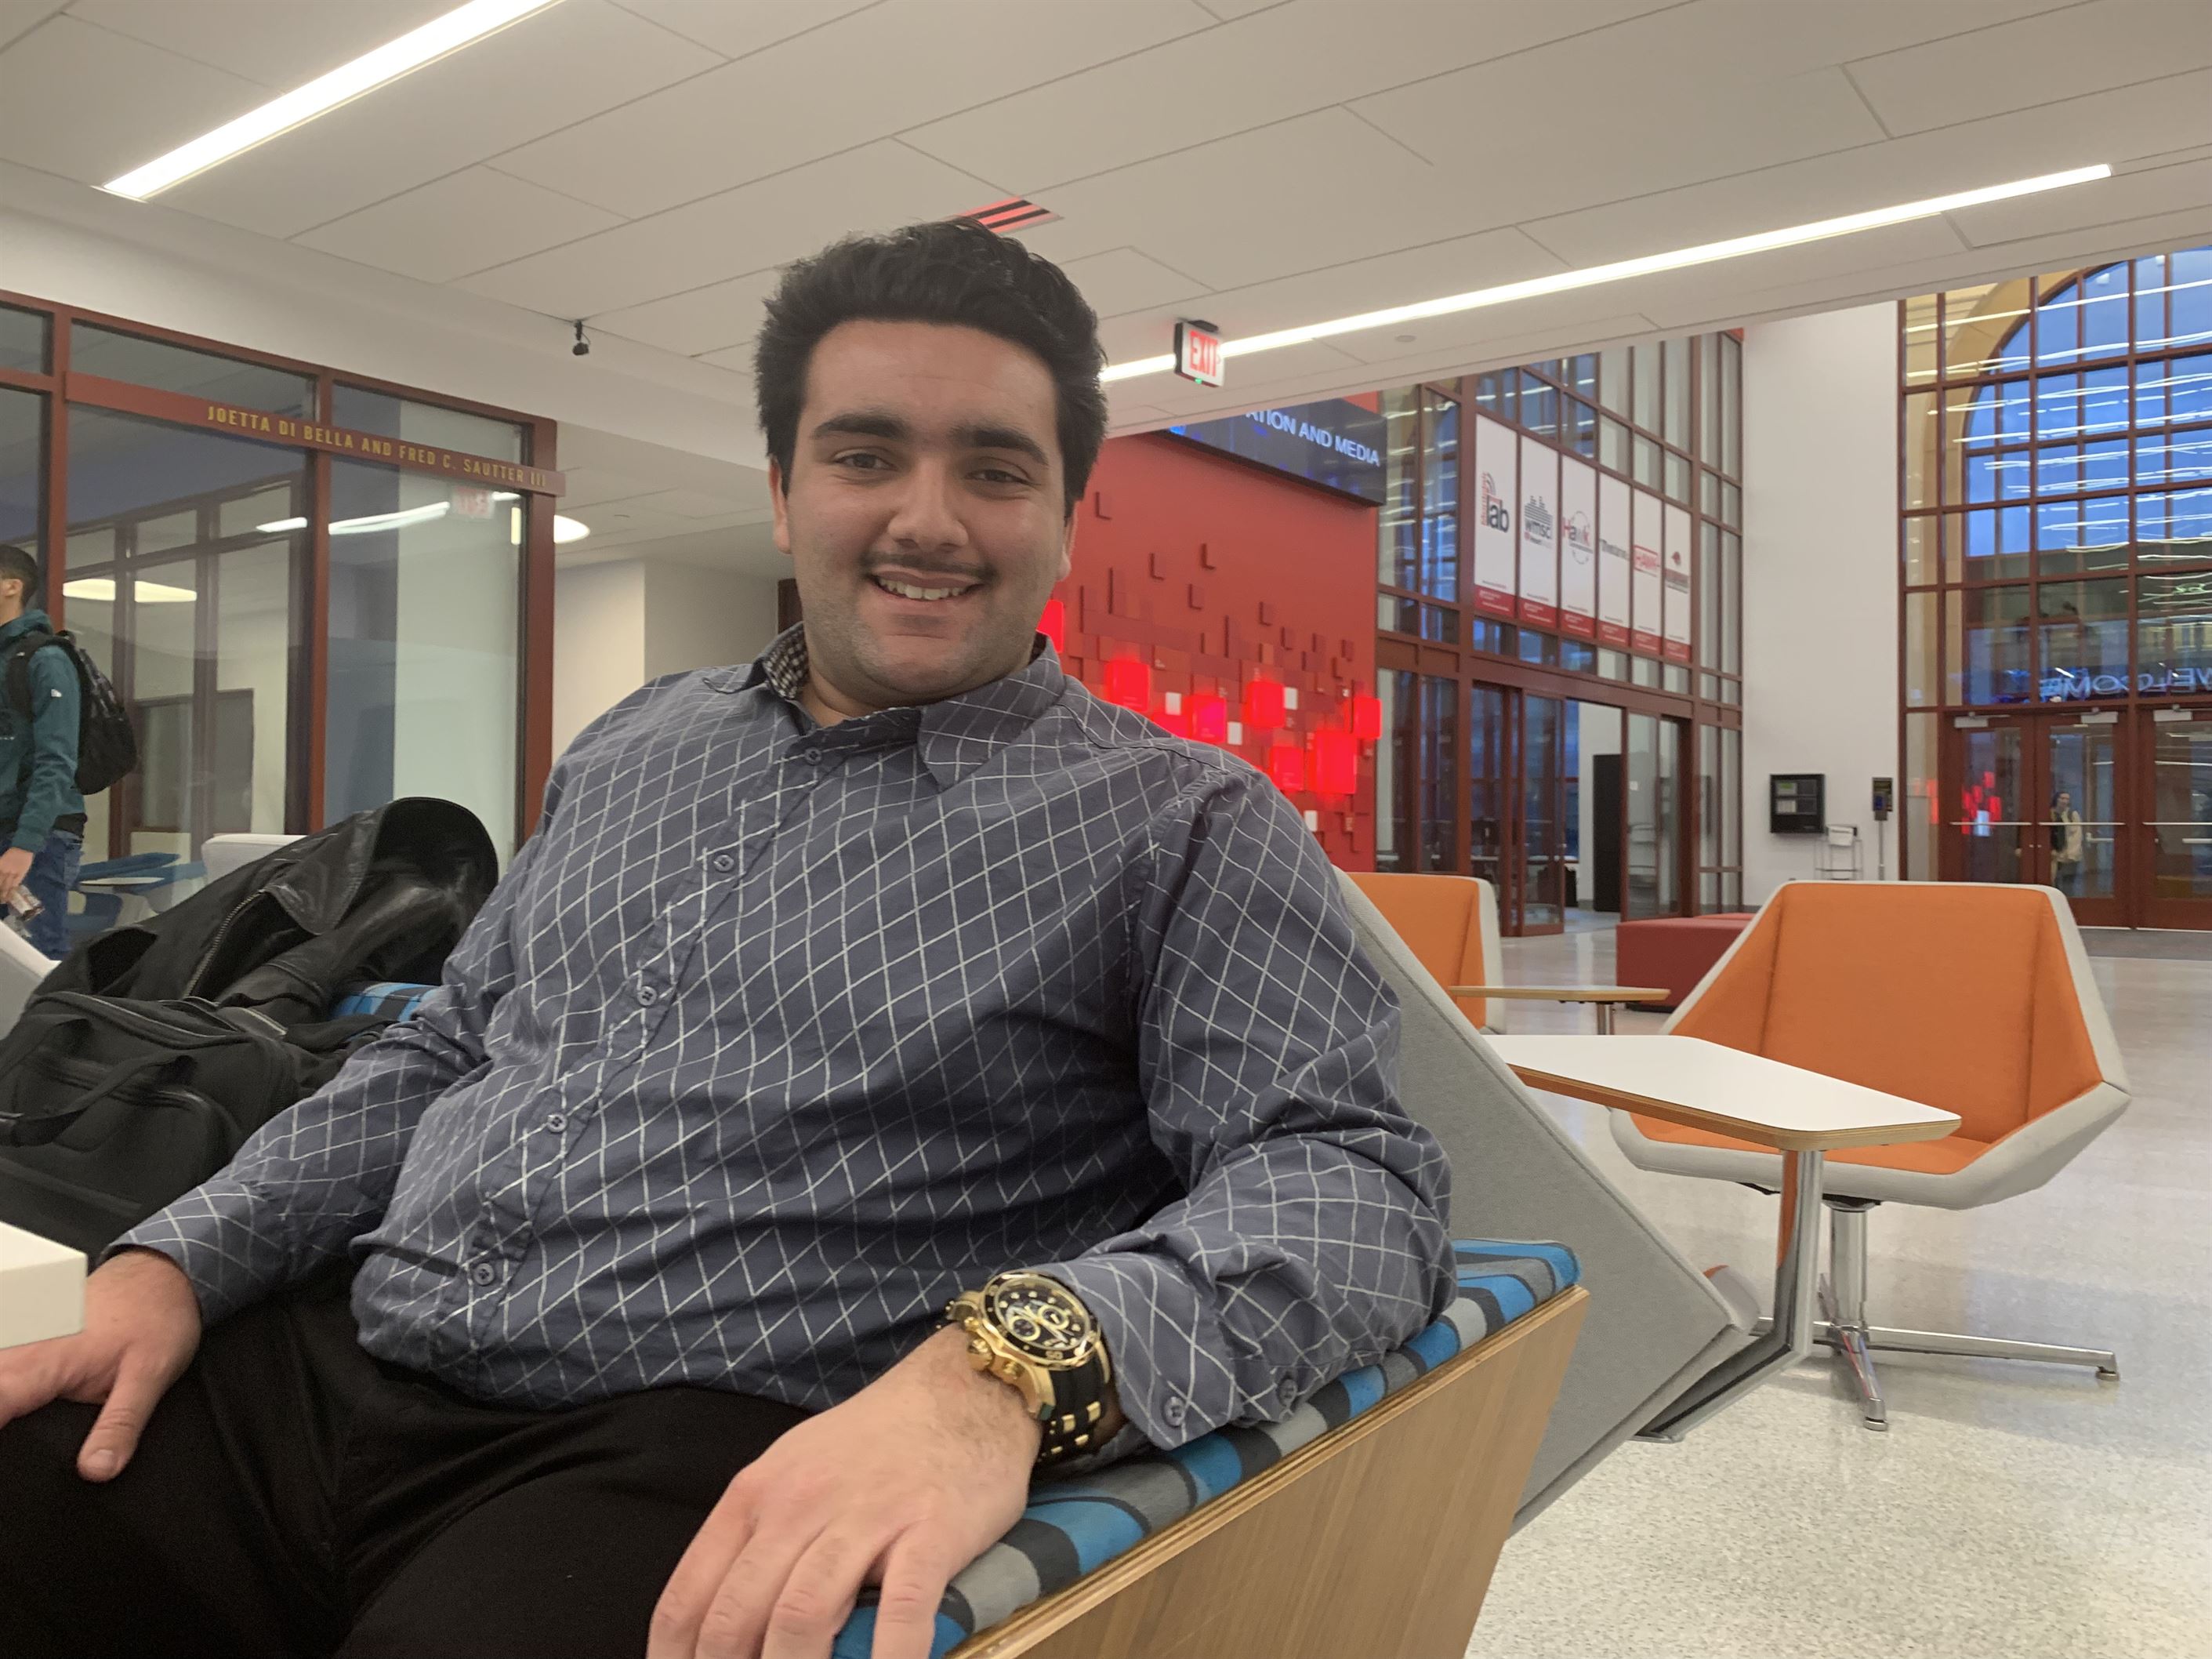 Bobby Dante, a senior television and digital media major, pays strict attention to the various options to buy or rent textbooks for his courses. Aidan Ivers | The Montclarion